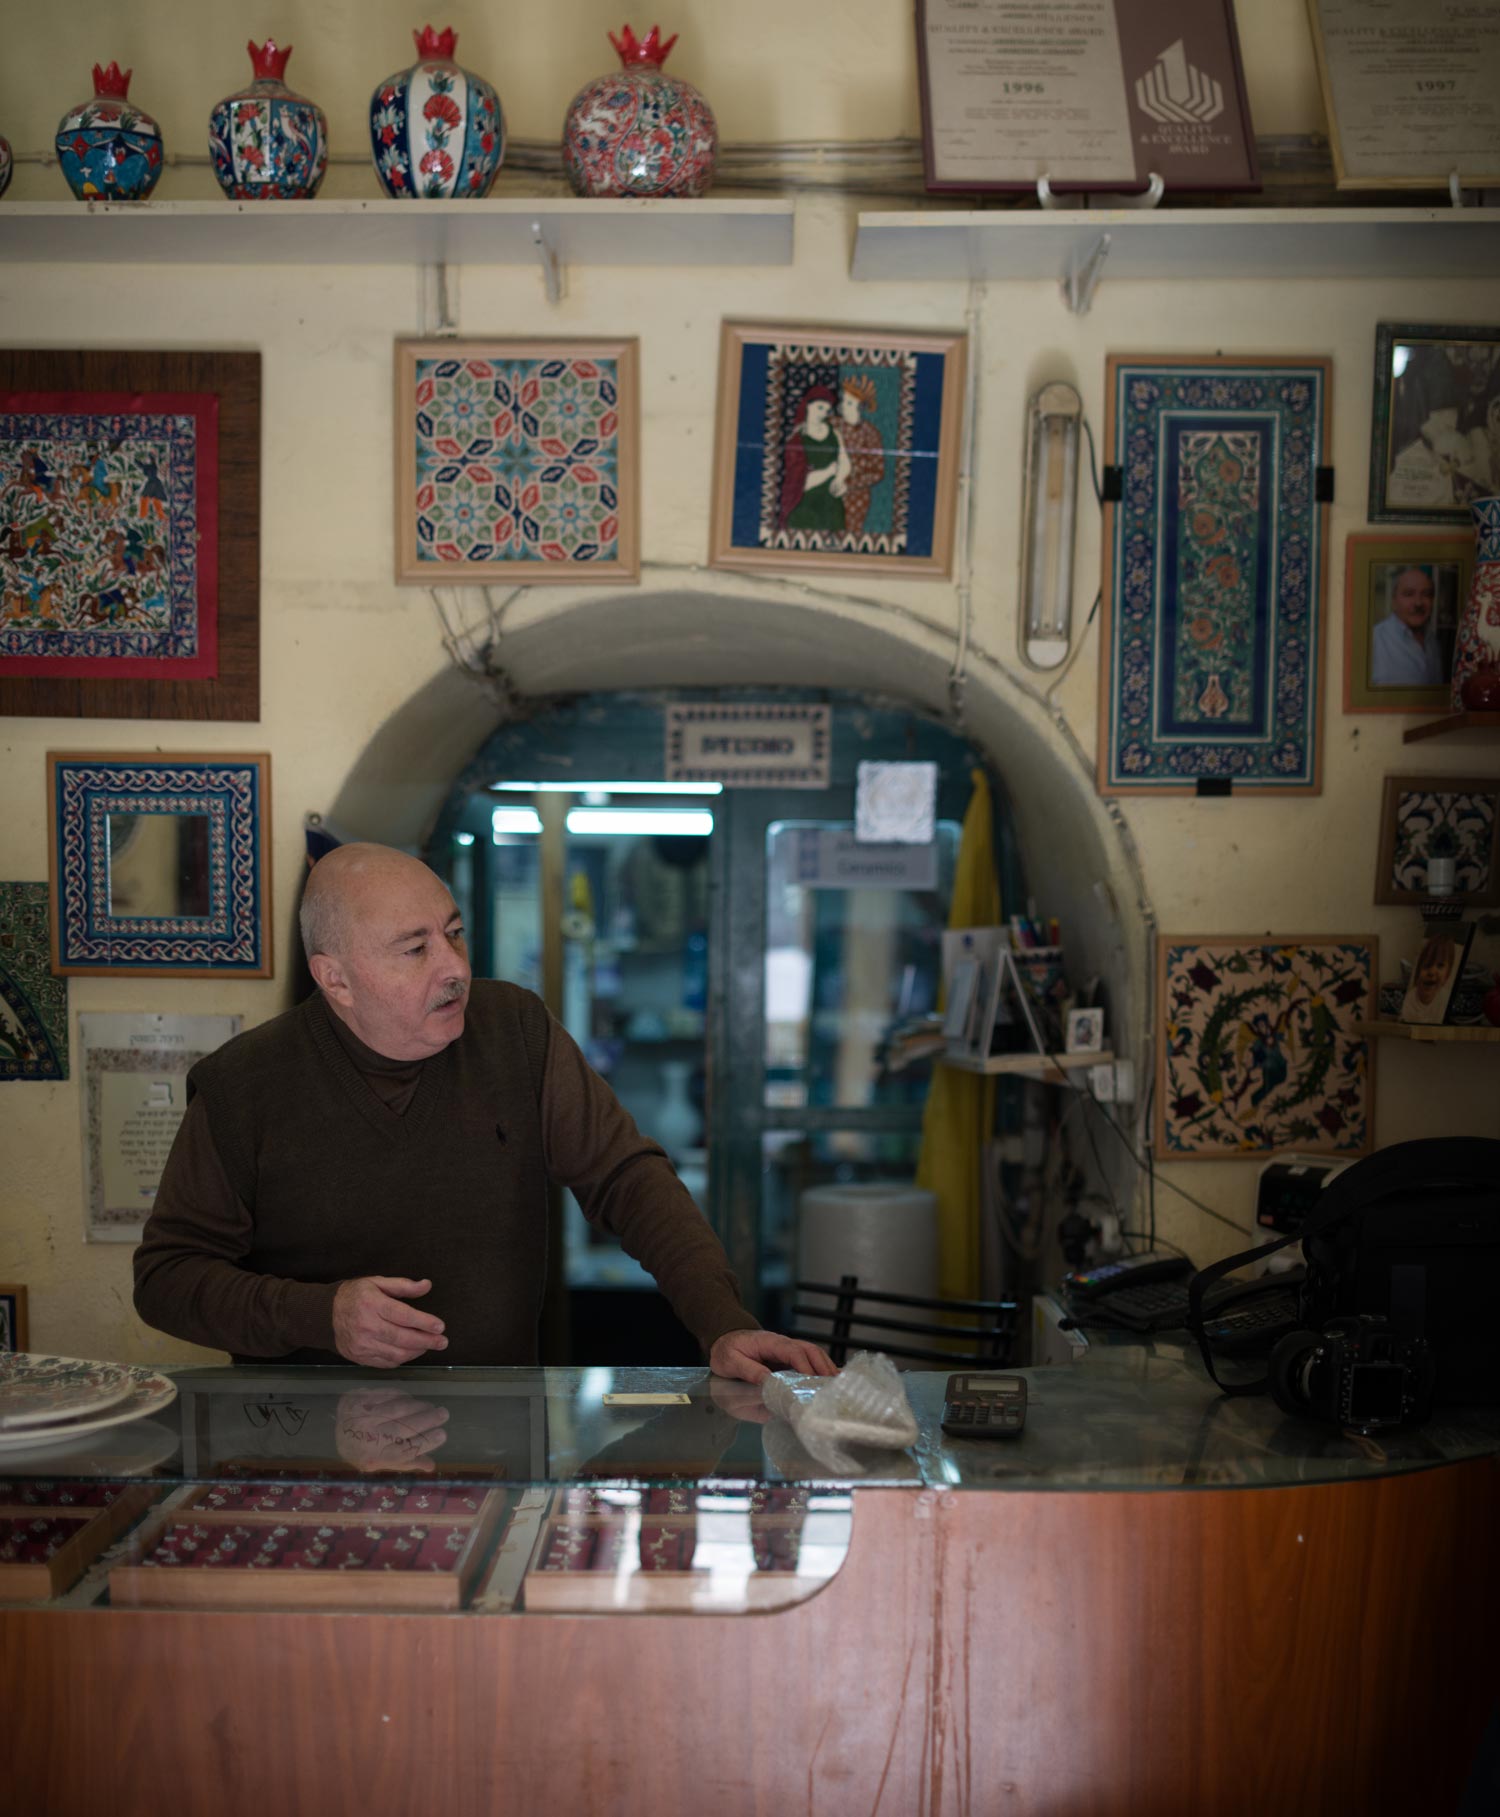  This Armenian shop owner told us about how his people are being driven from Israel.&nbsp; Once in history they outnumbered Jews and Muslims alike.&nbsp; Now there are only a few hundred left in the city. 